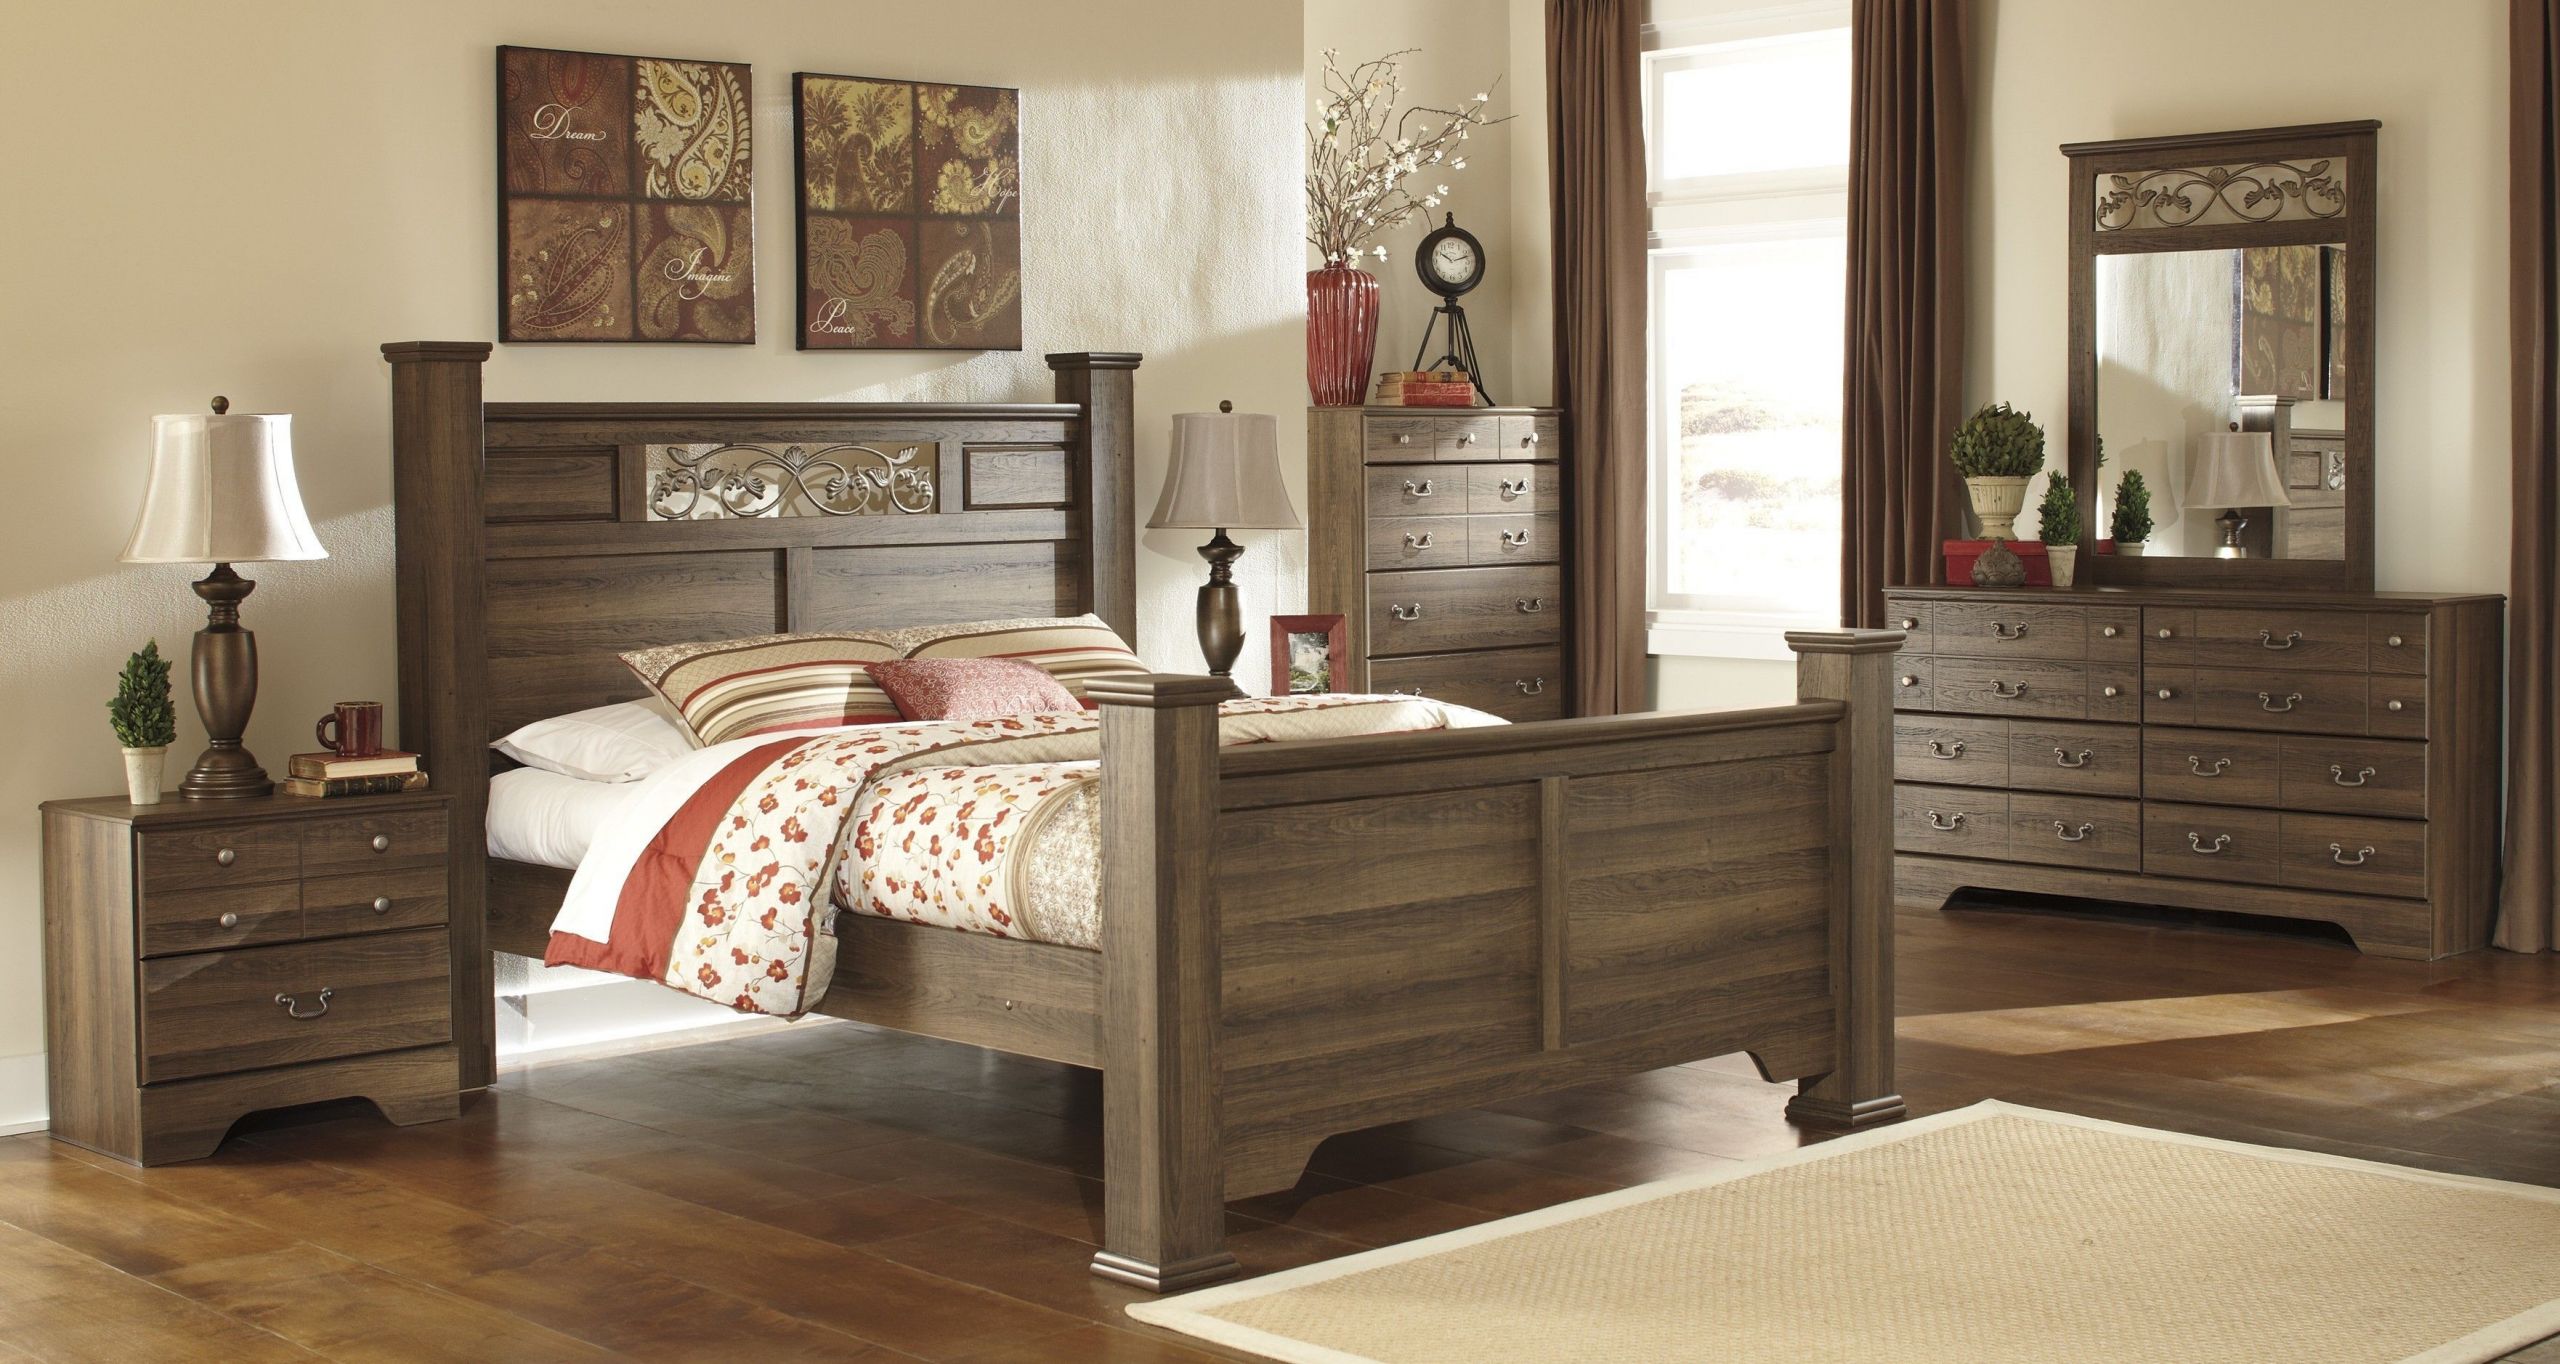 Discount Kids Bedroom Sets
 Pin by Ed s Discount Furniture on Bedroom sets With